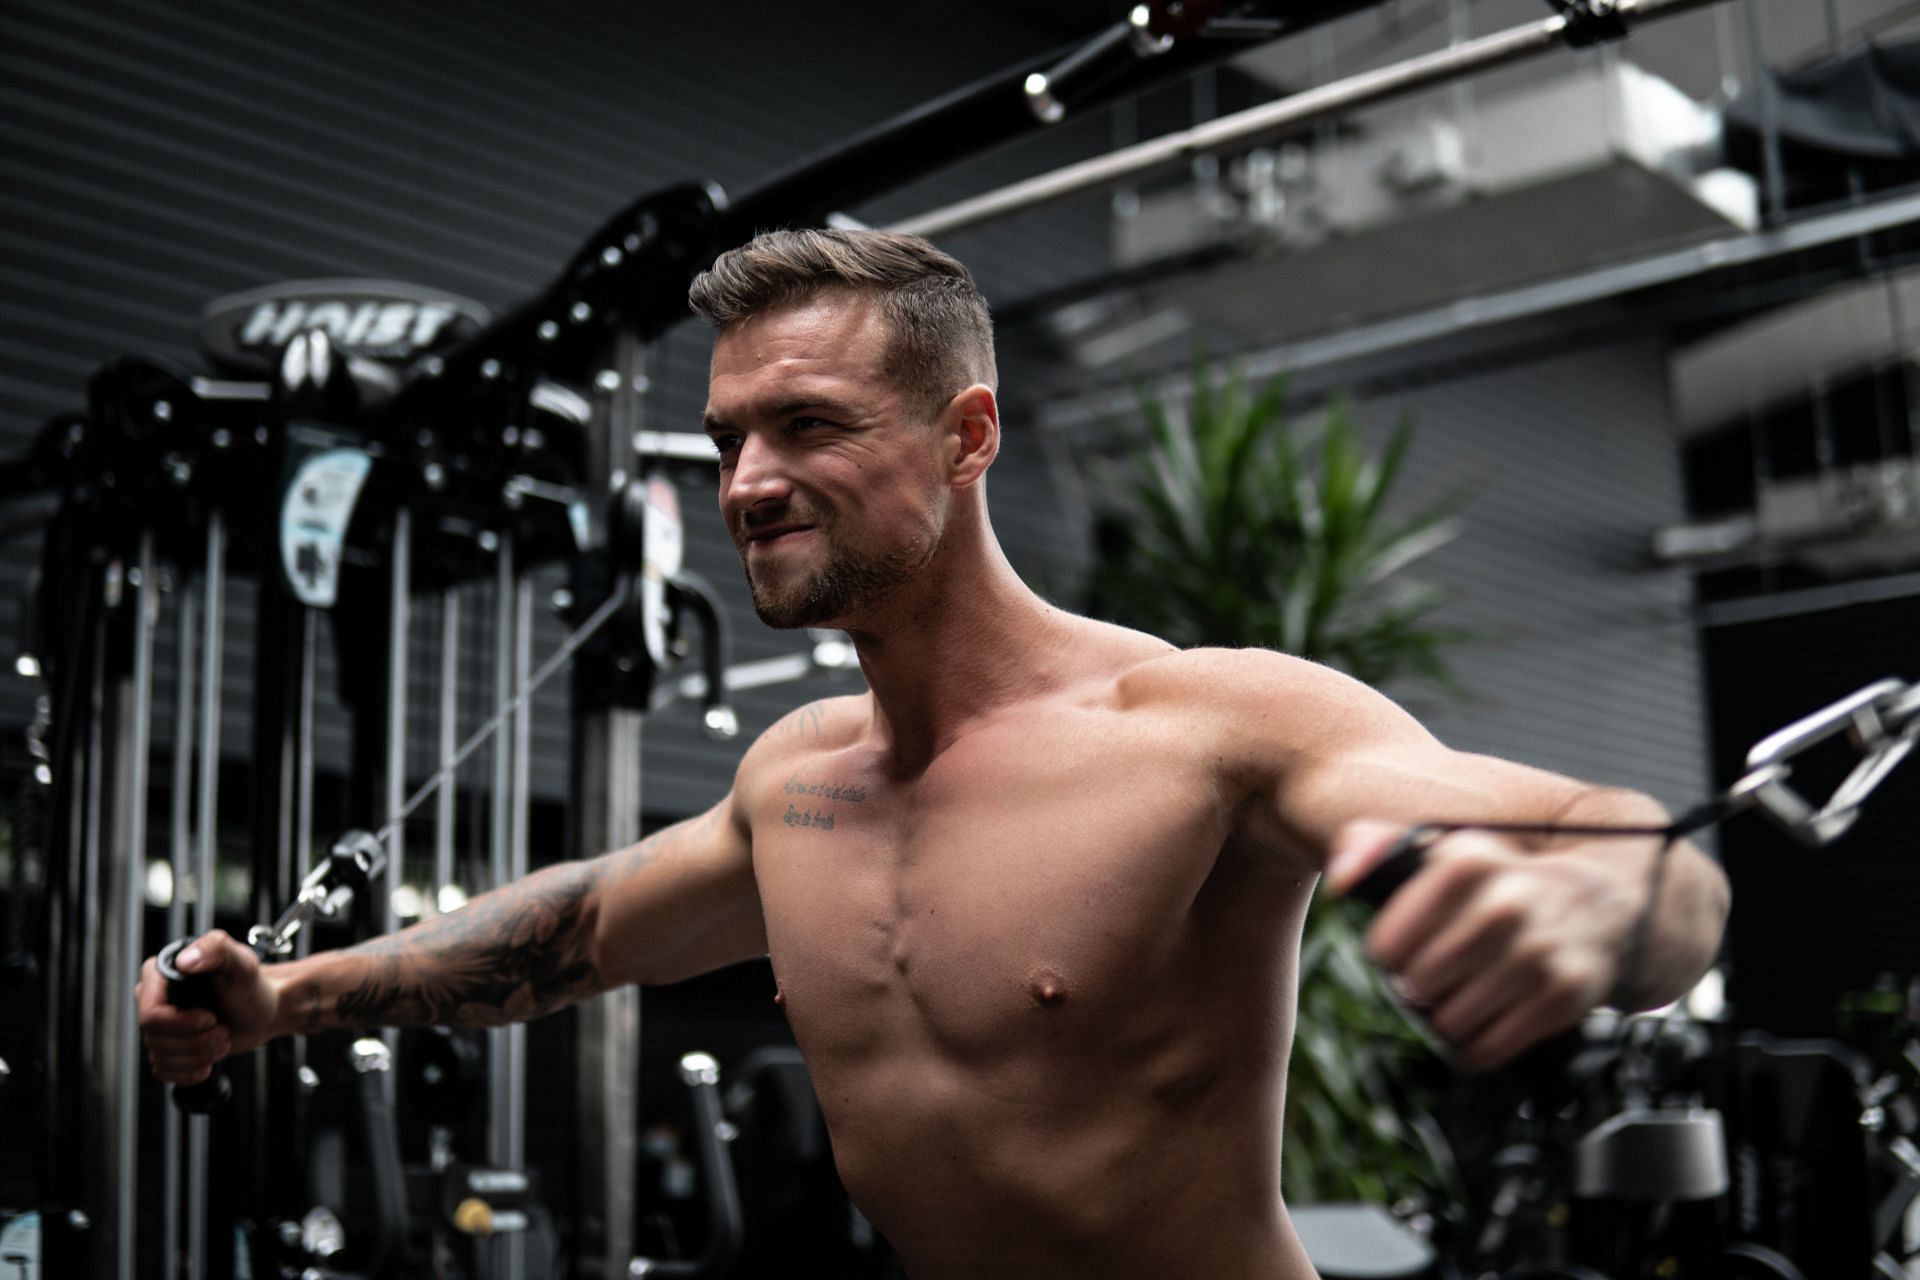 Exercises men in their 40s can do to stay shredded! (Image via unsplash/Milan Csizmadia)